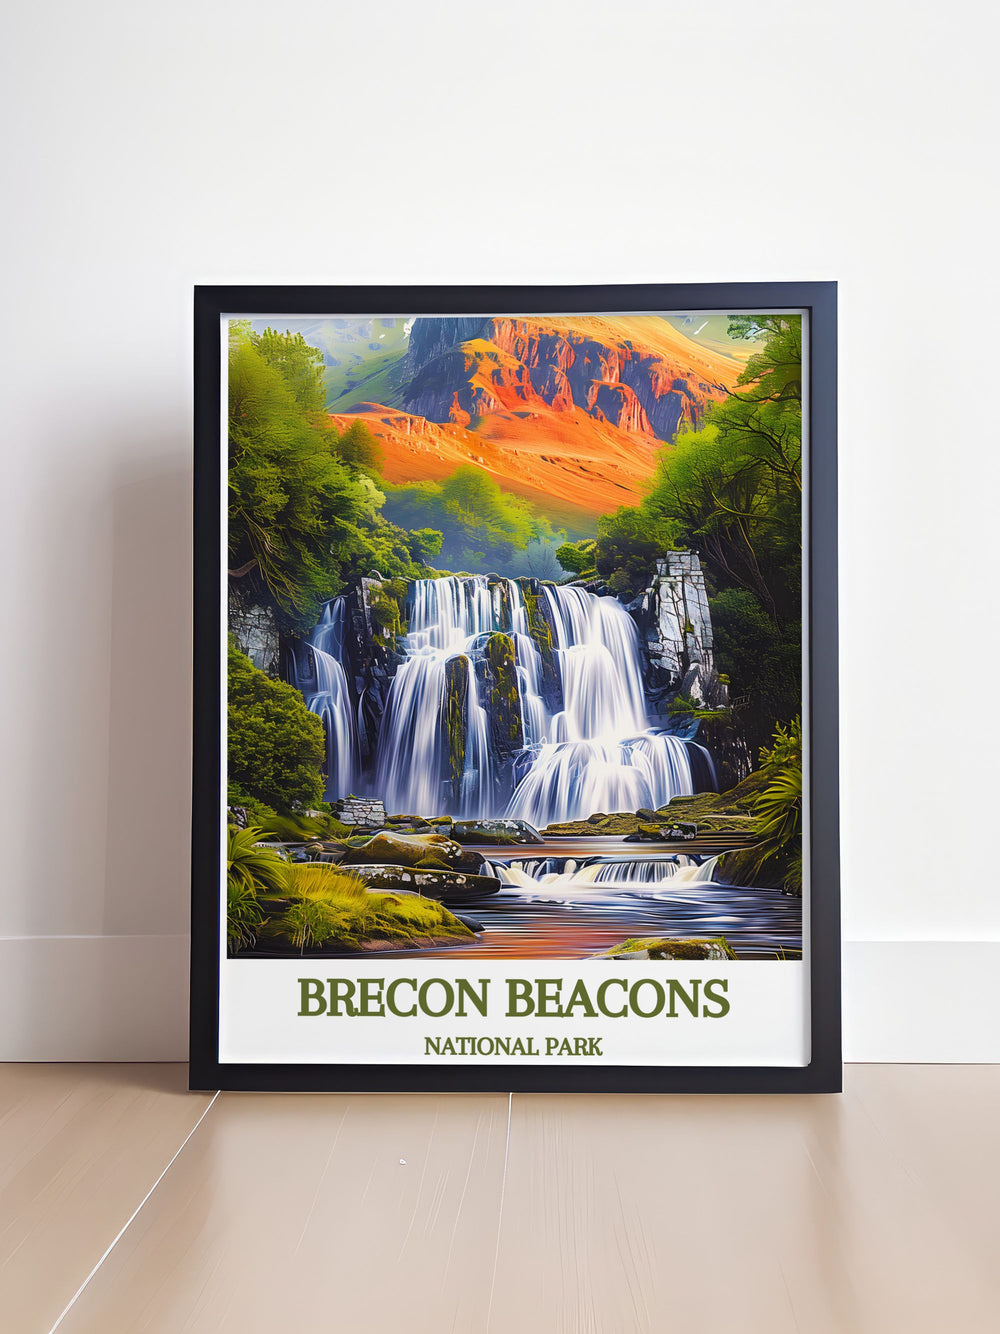 Beautifully framed art piece featuring Brecon Beacons Falls, highlighting the lush greenery and tranquil atmosphere of this iconic location in South Wales. Ideal for creating a peaceful and inspiring focal point in any room.